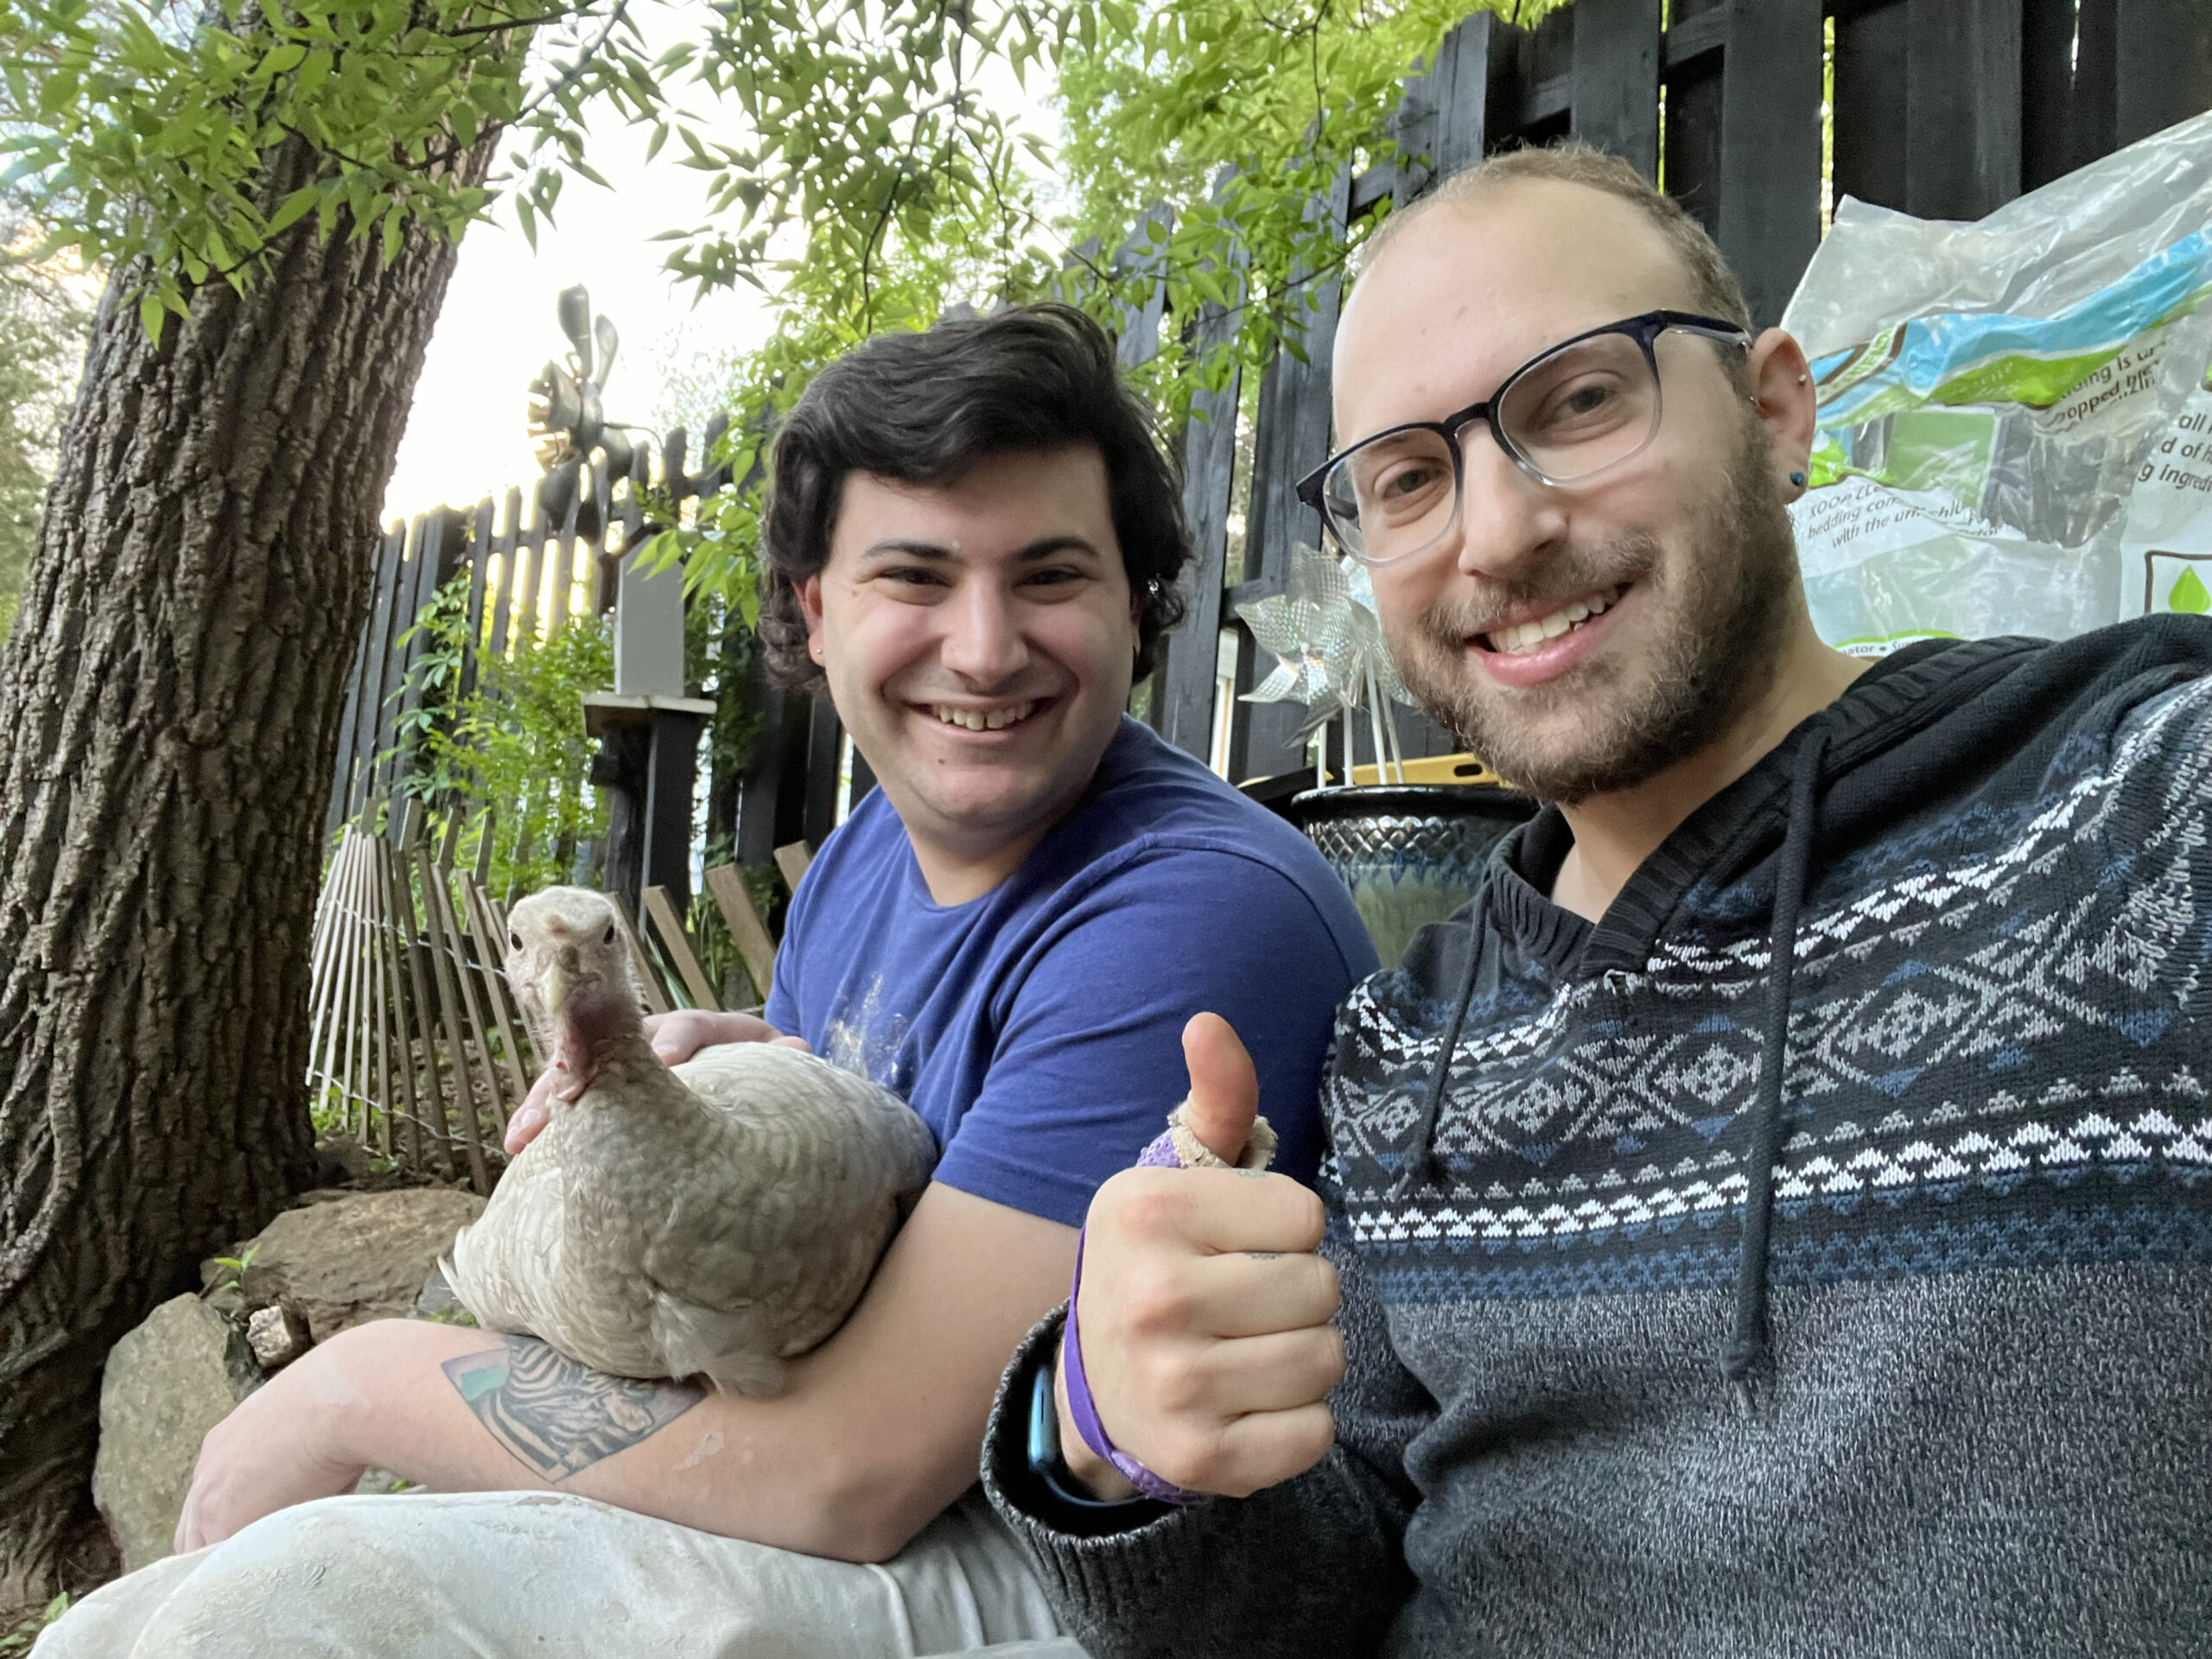 two people sitting together holding a chicken. the person in the background angel is wearing a blue tee shirt. the man in the foreground is wearing a knitted hoodie and glasses and is giving a thumbs up.